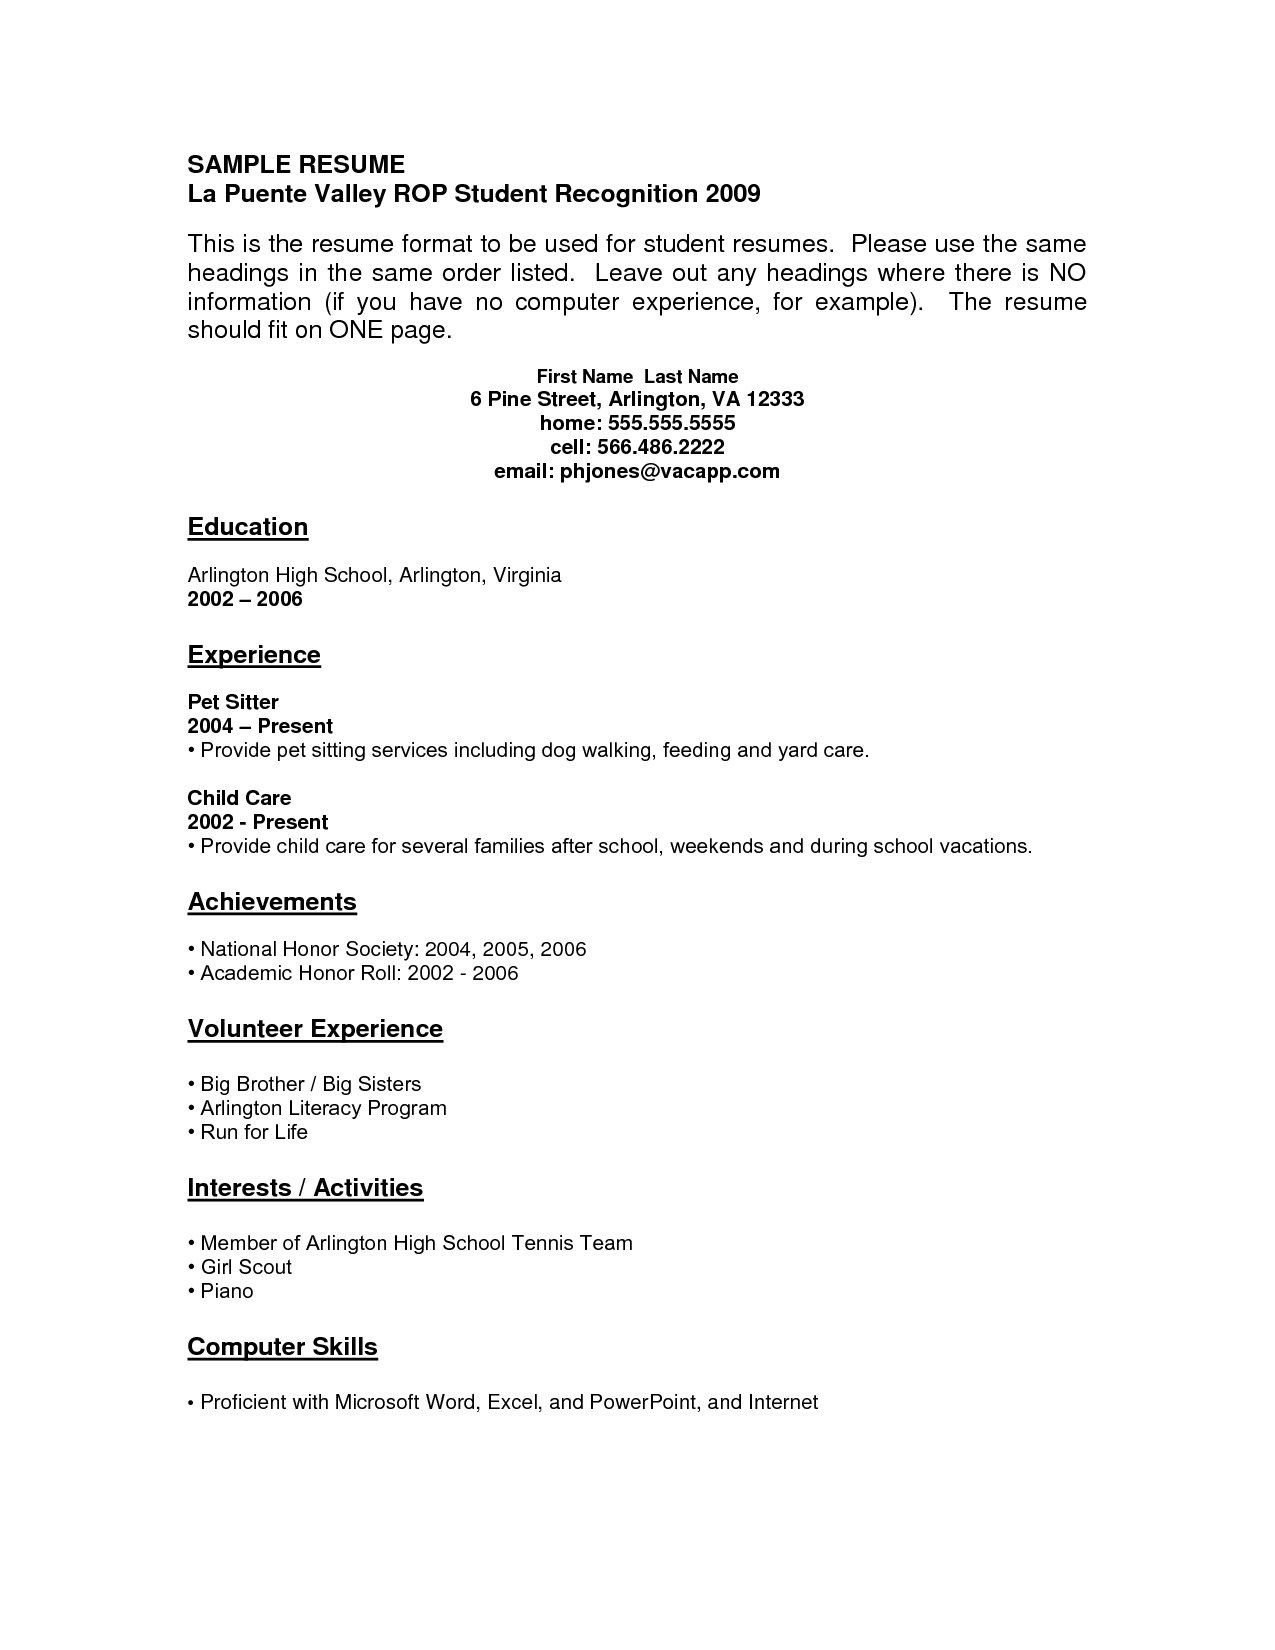 Resume Template for Highschool Graduate with No Work Experience Resume Examples with No Job Experience – Resume Templates Job …